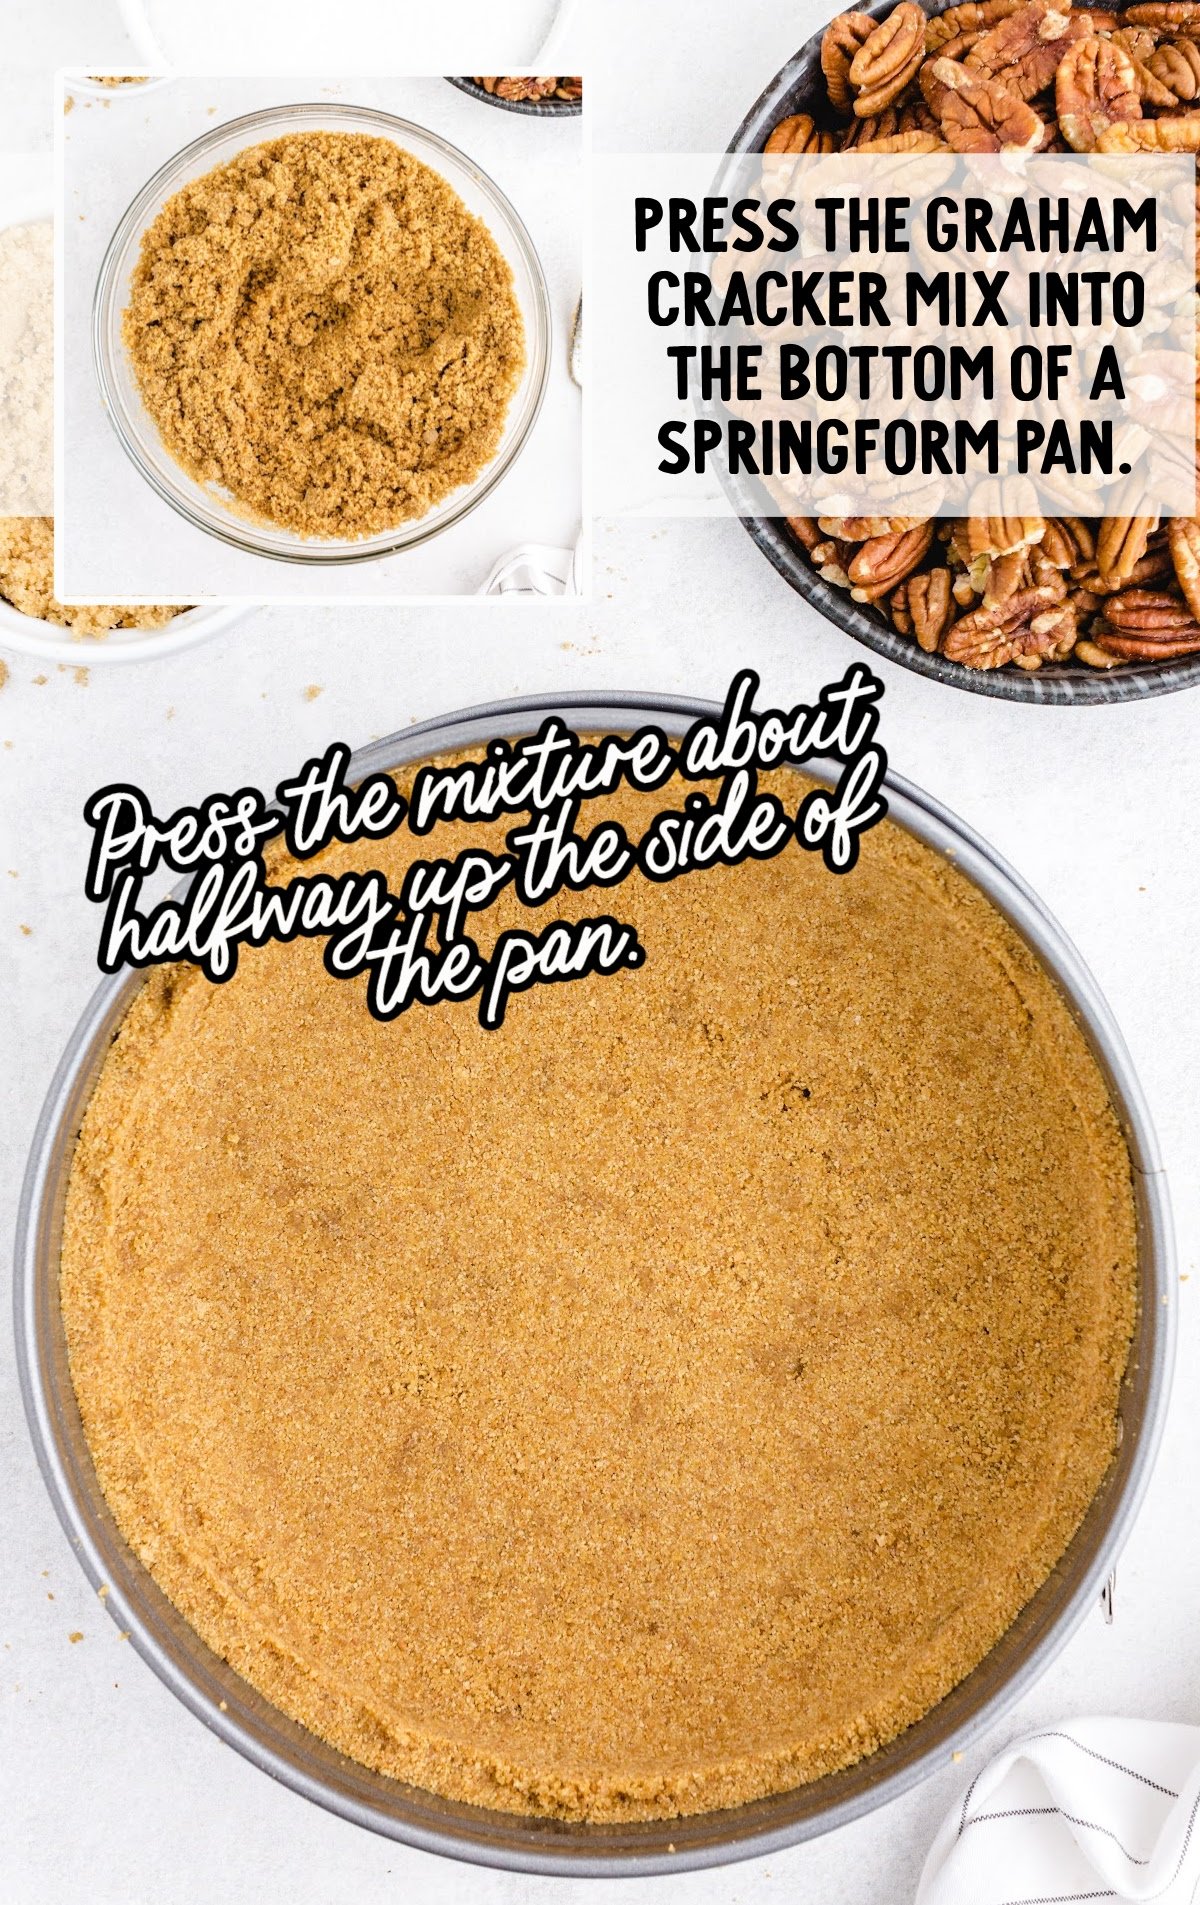 graham cracker mix pressed into the bottom of a springform pan